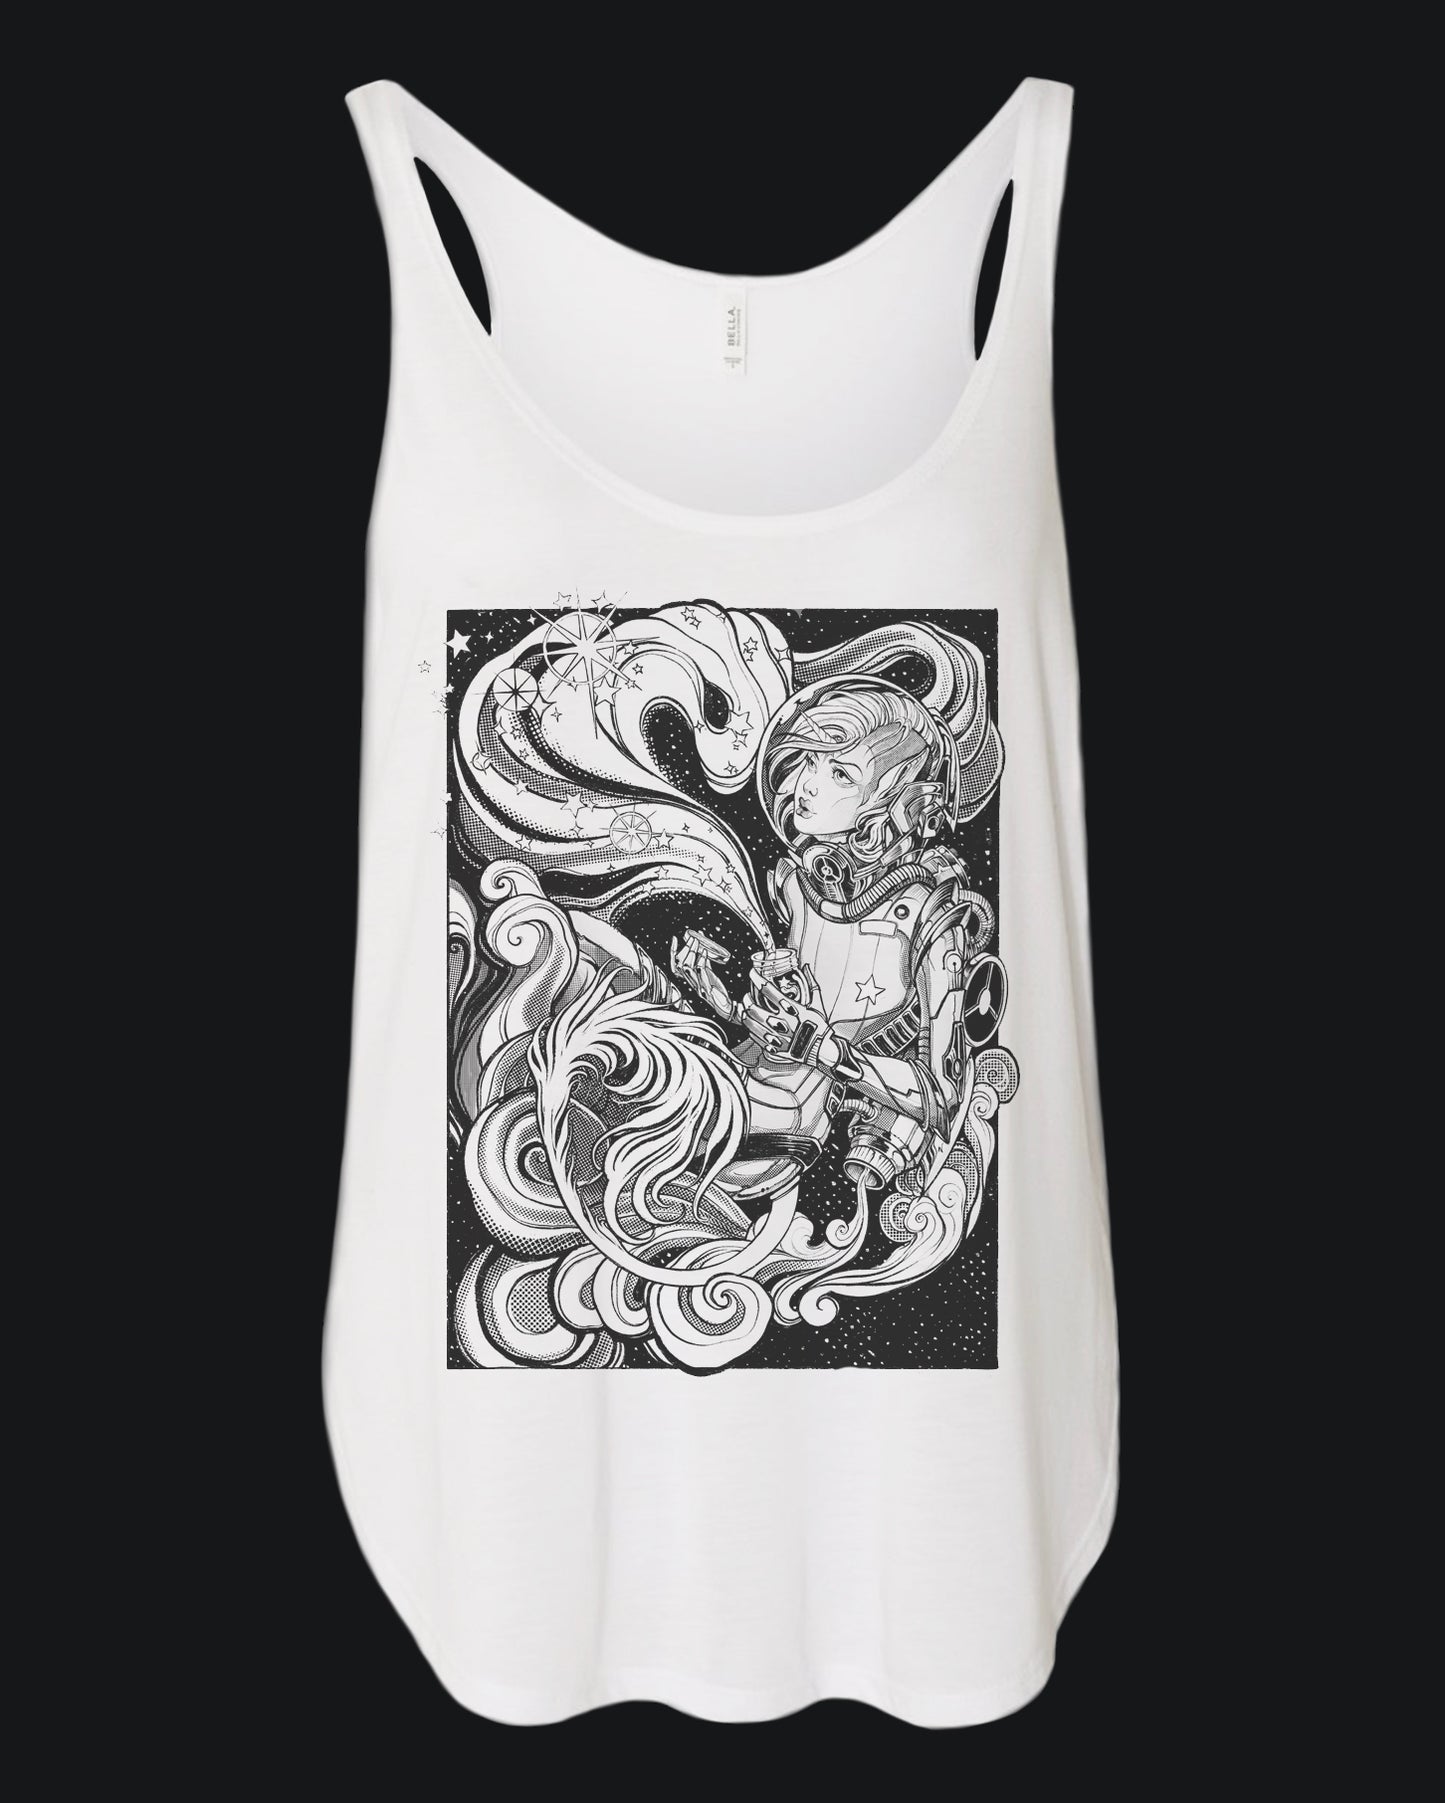 PRE-ORDER "Star Chasers" Femme Tank Top by Teresa Sharpe